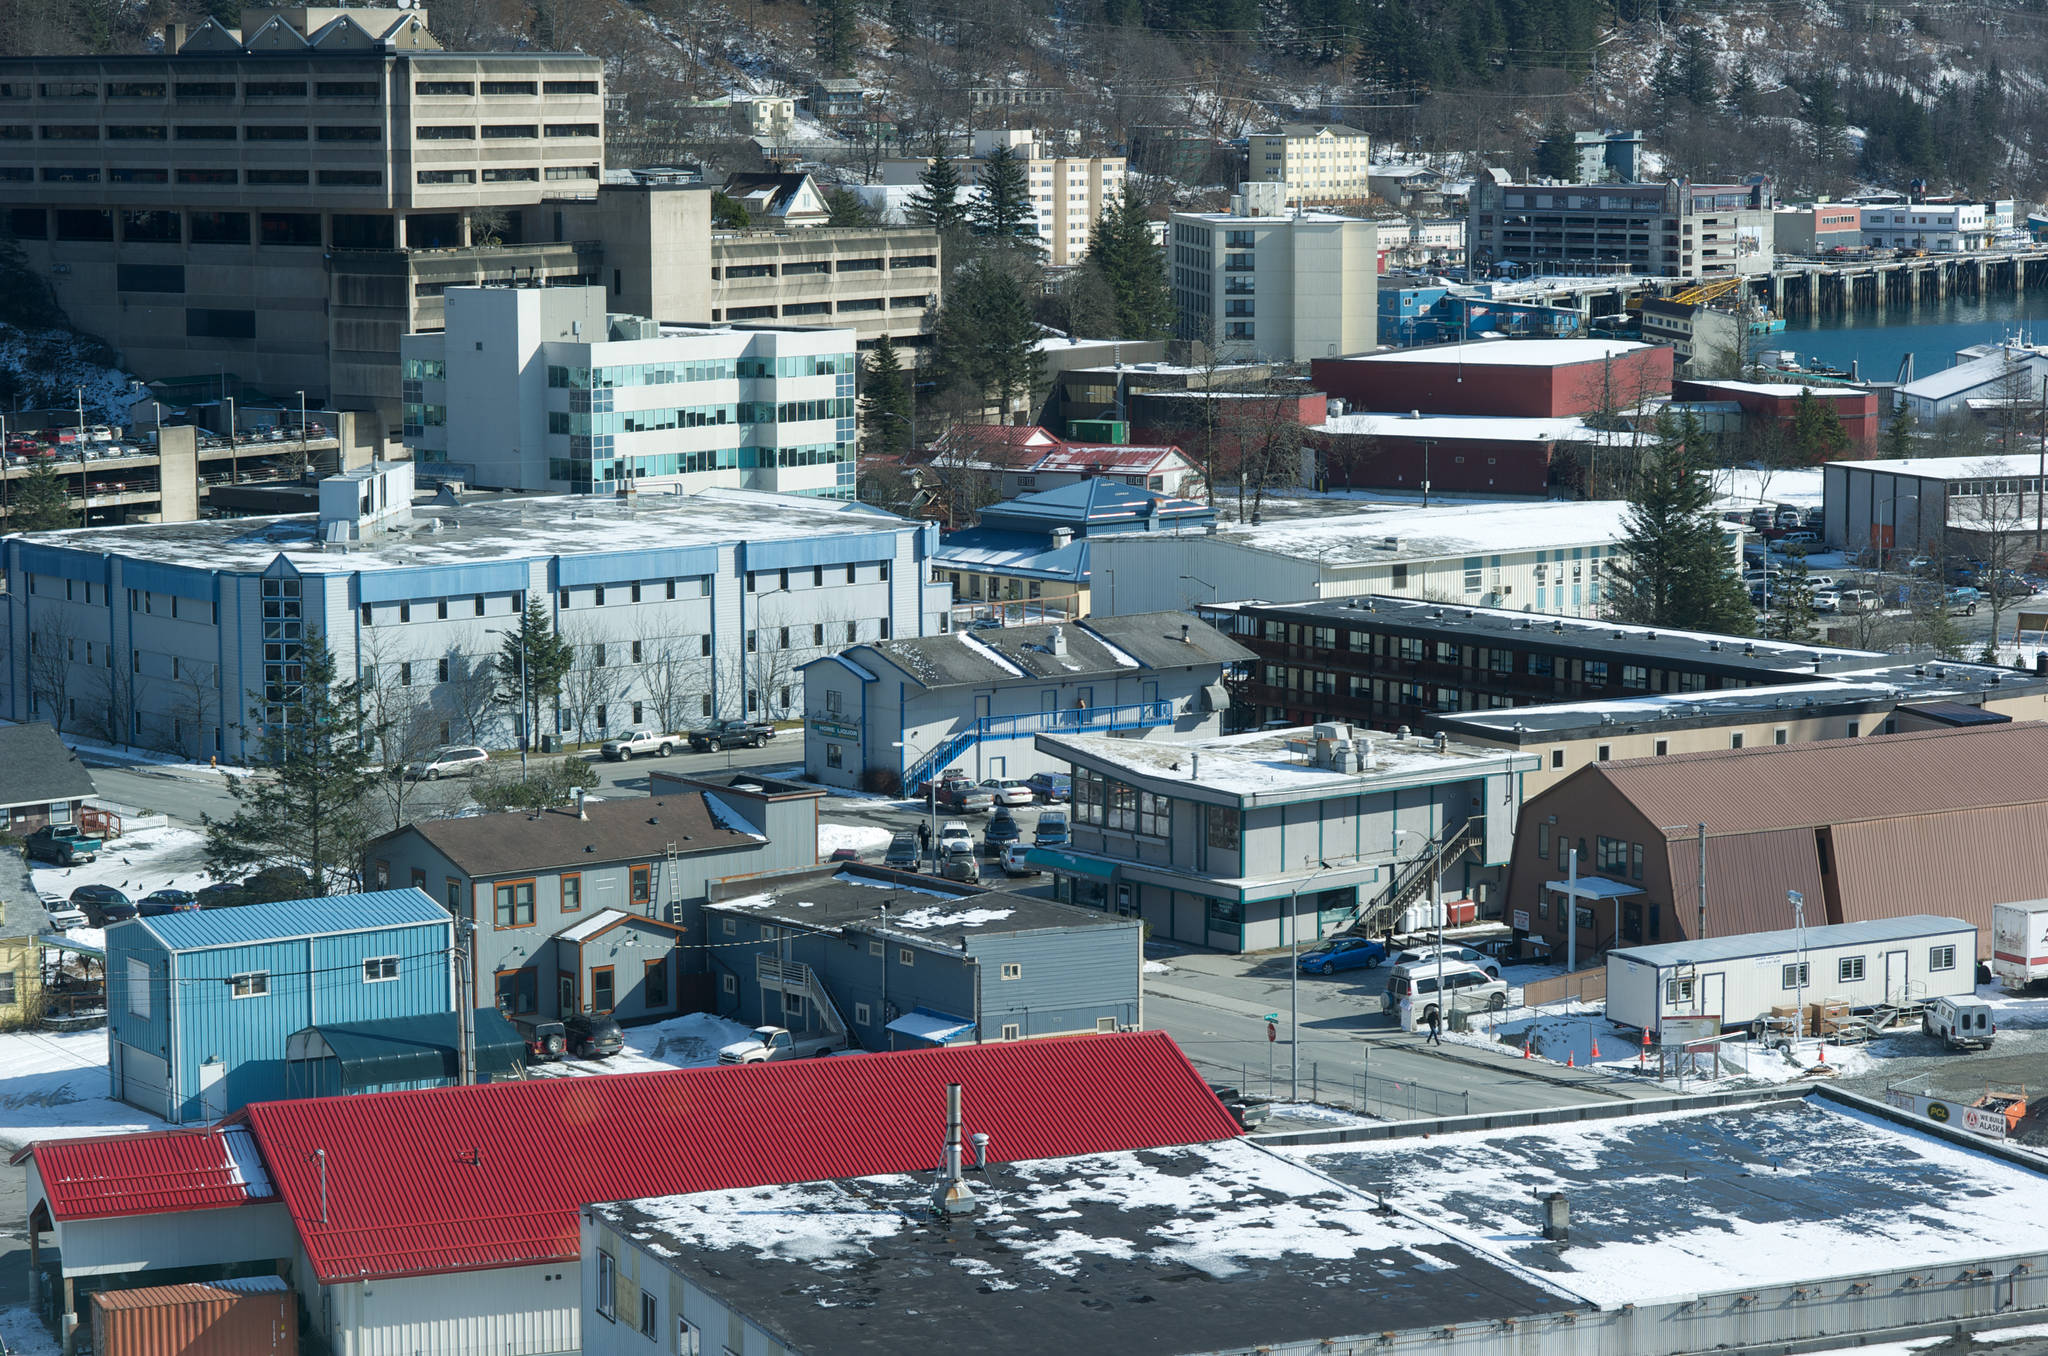 A new name that acknowledges the downtown area’s indigenous history seems imminent for the Willoughby District. (Michael Penn | Juneau Empire File)